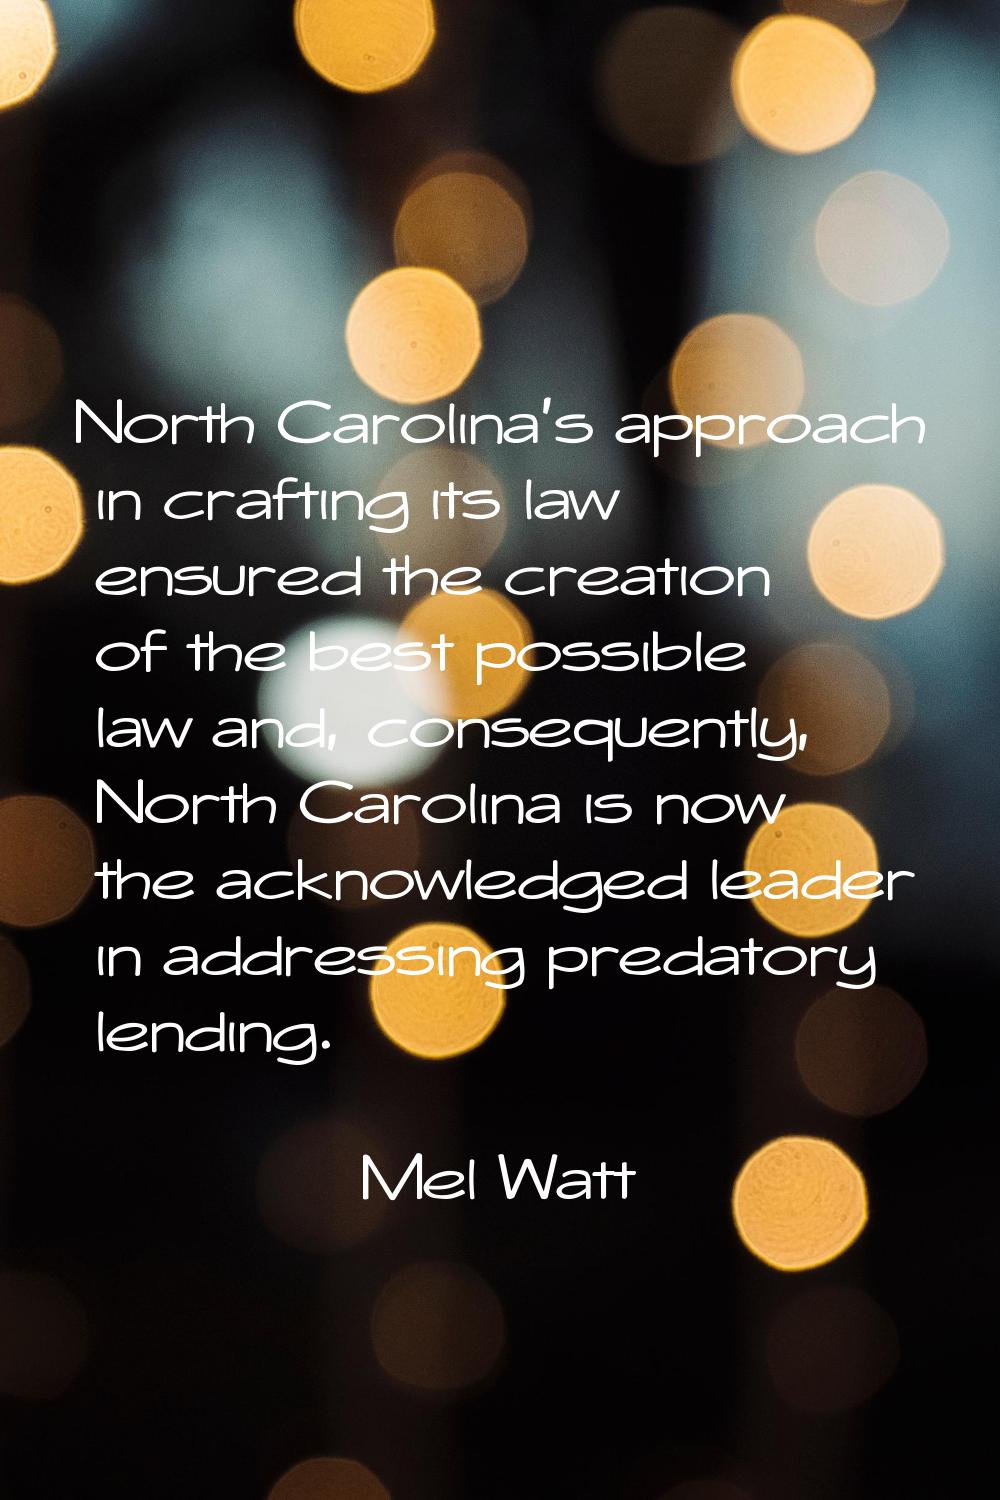 North Carolina's approach in crafting its law ensured the creation of the best possible law and, co